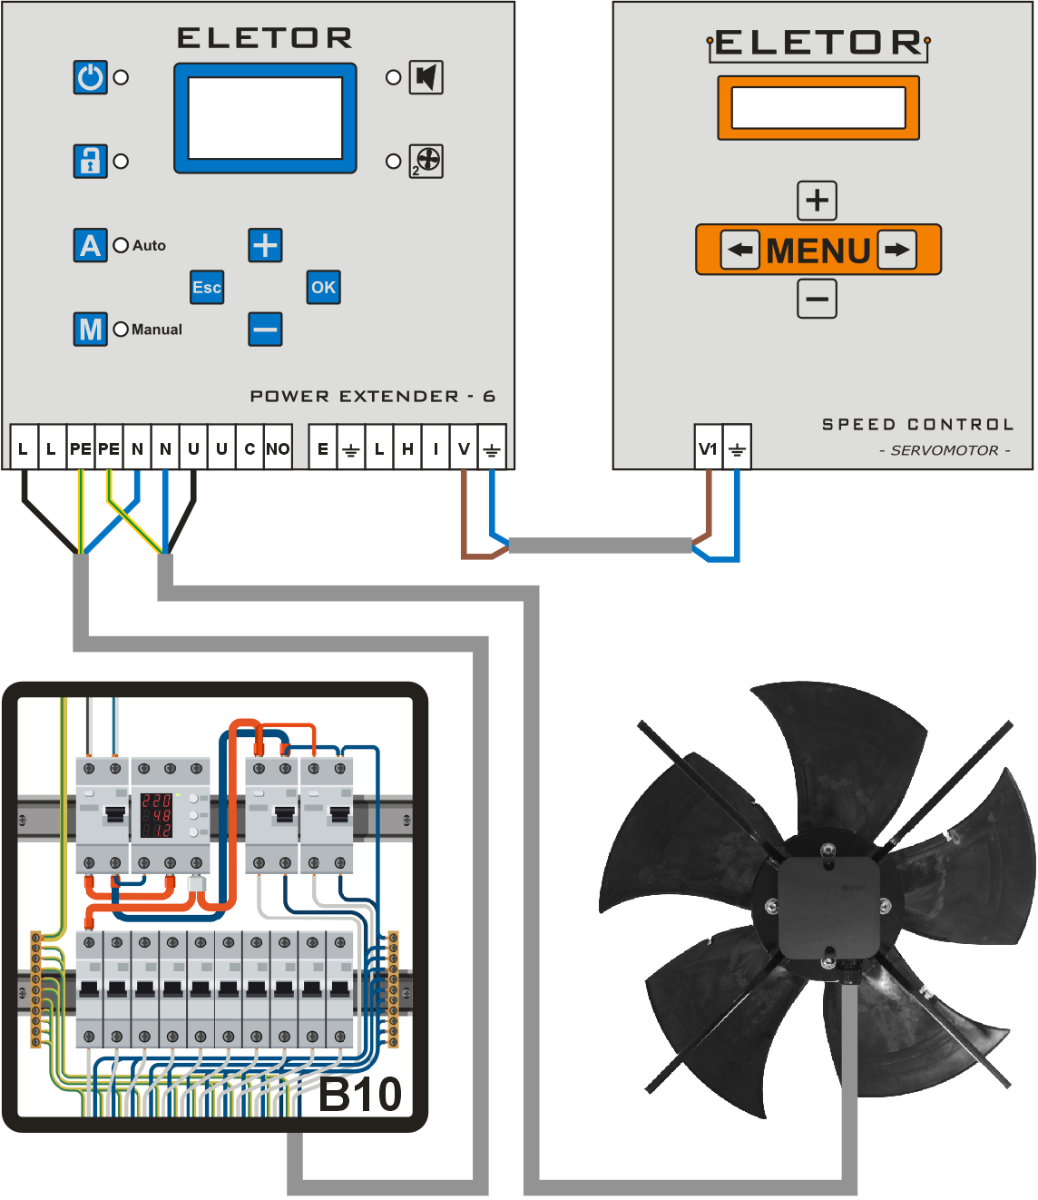 Connection of 6A power extension to switchgear and fan for speed control.